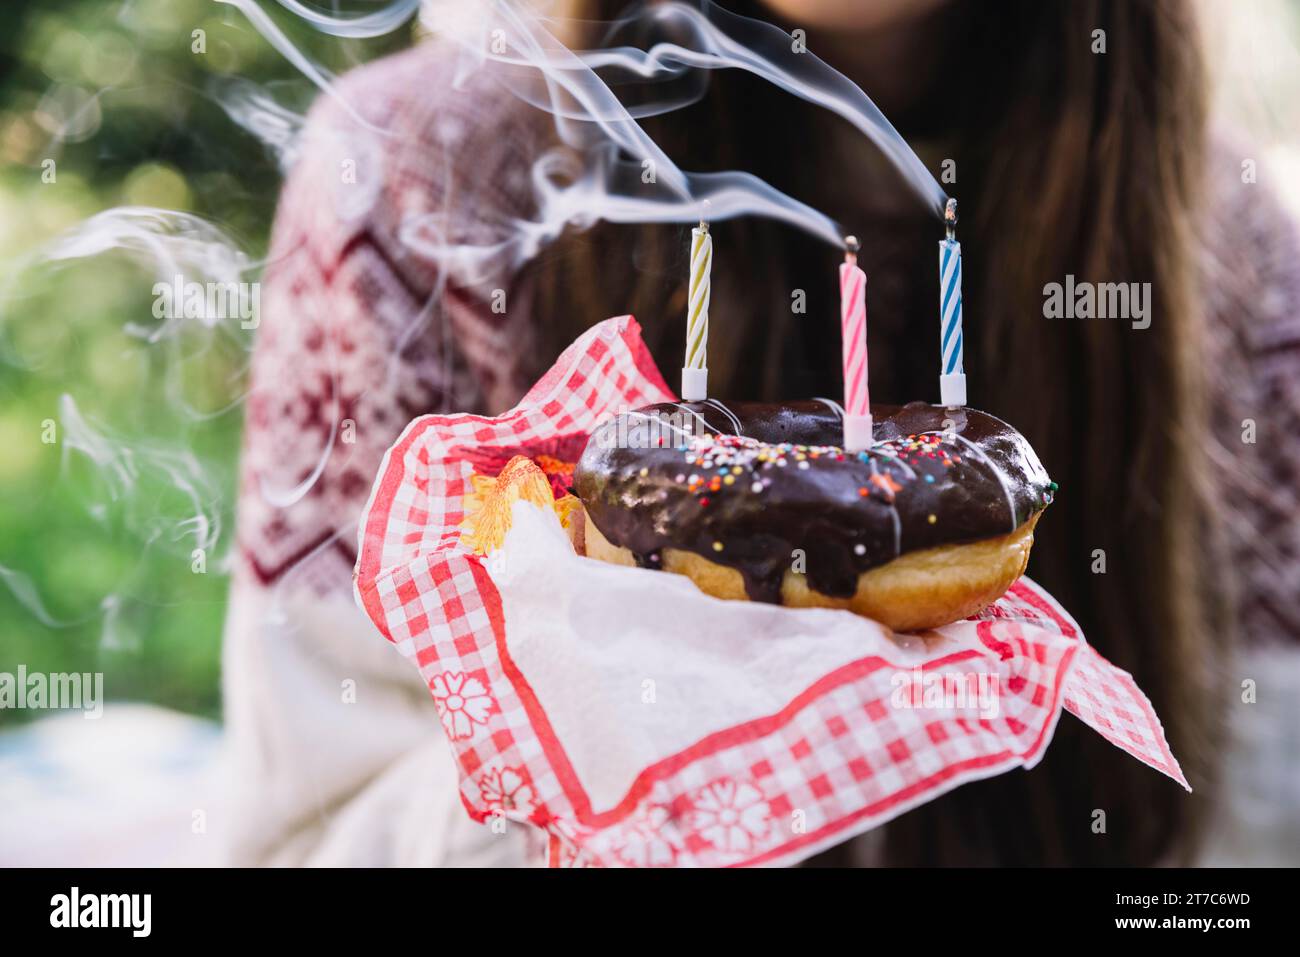 Girl holding chocolate donut with extinguish candles Stock Photo